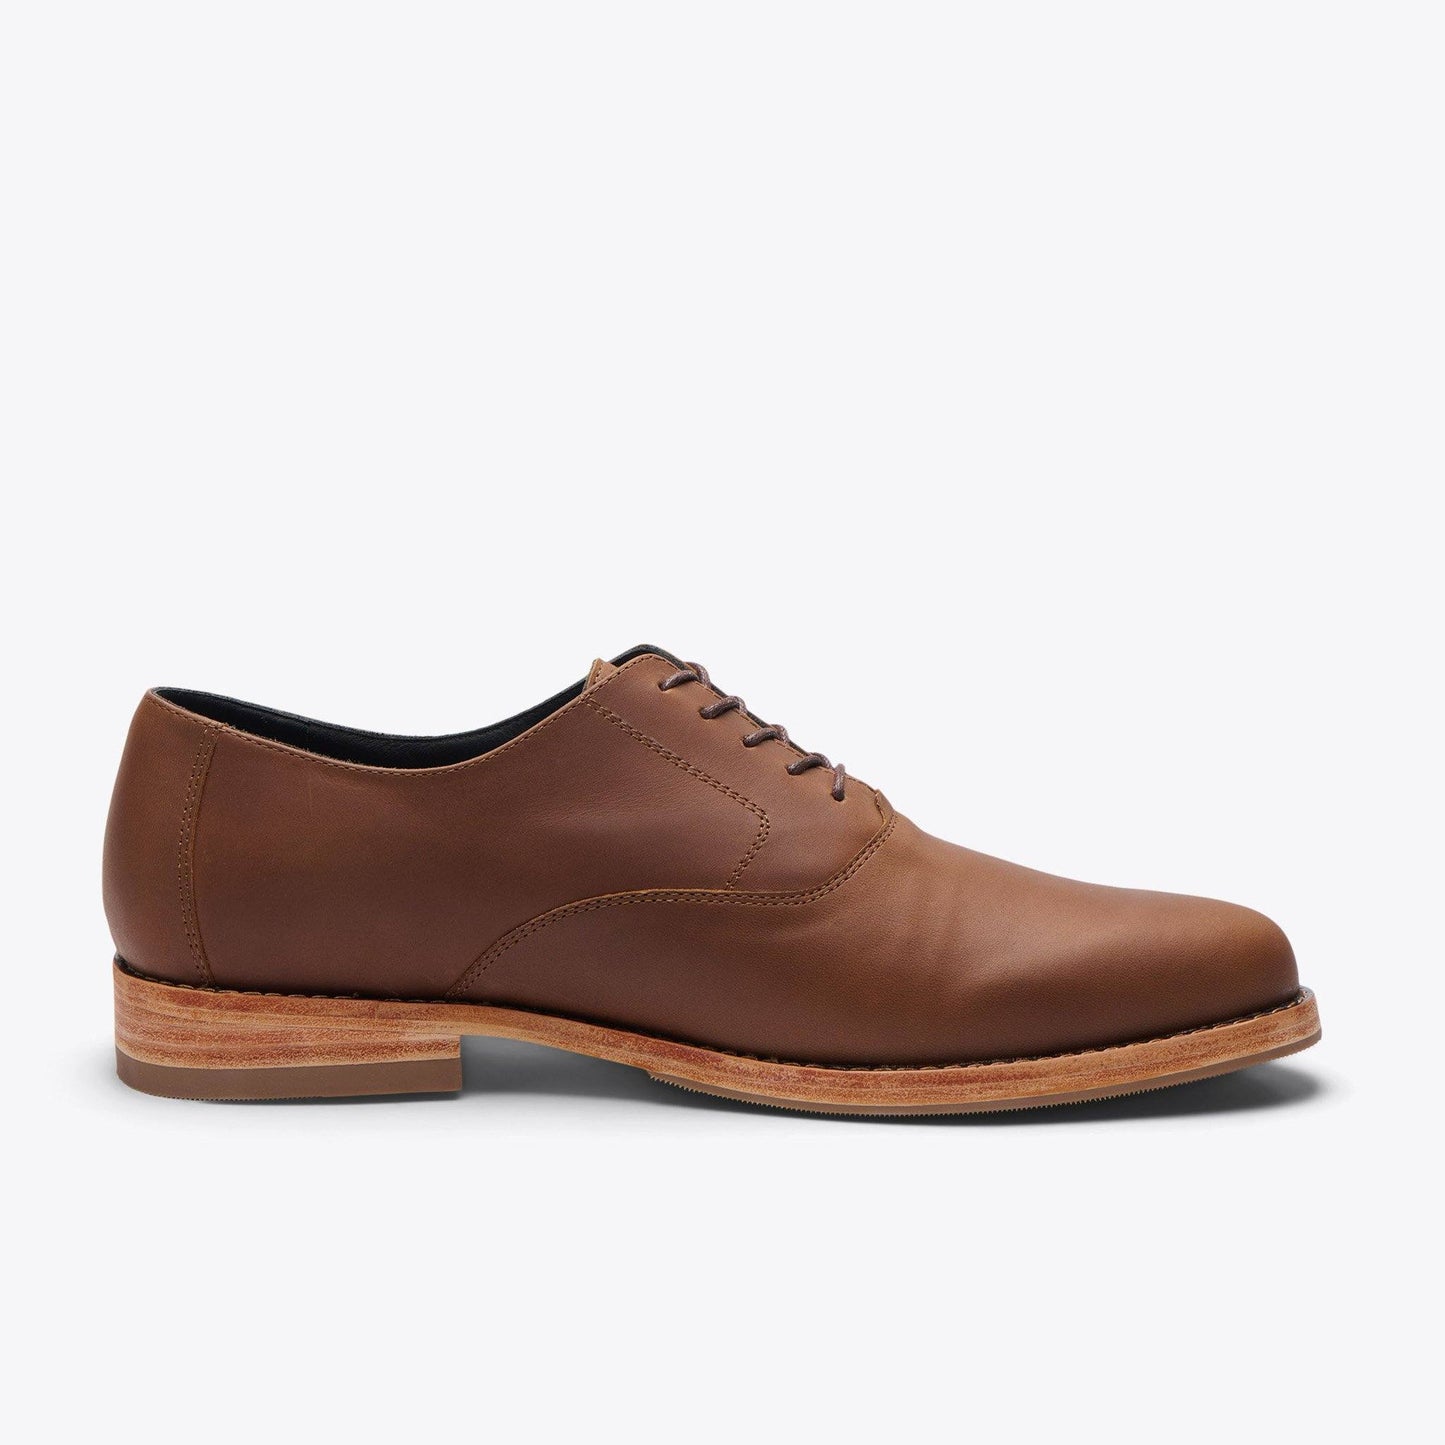 Nisolo Shoes - Everyday Oxford Brown